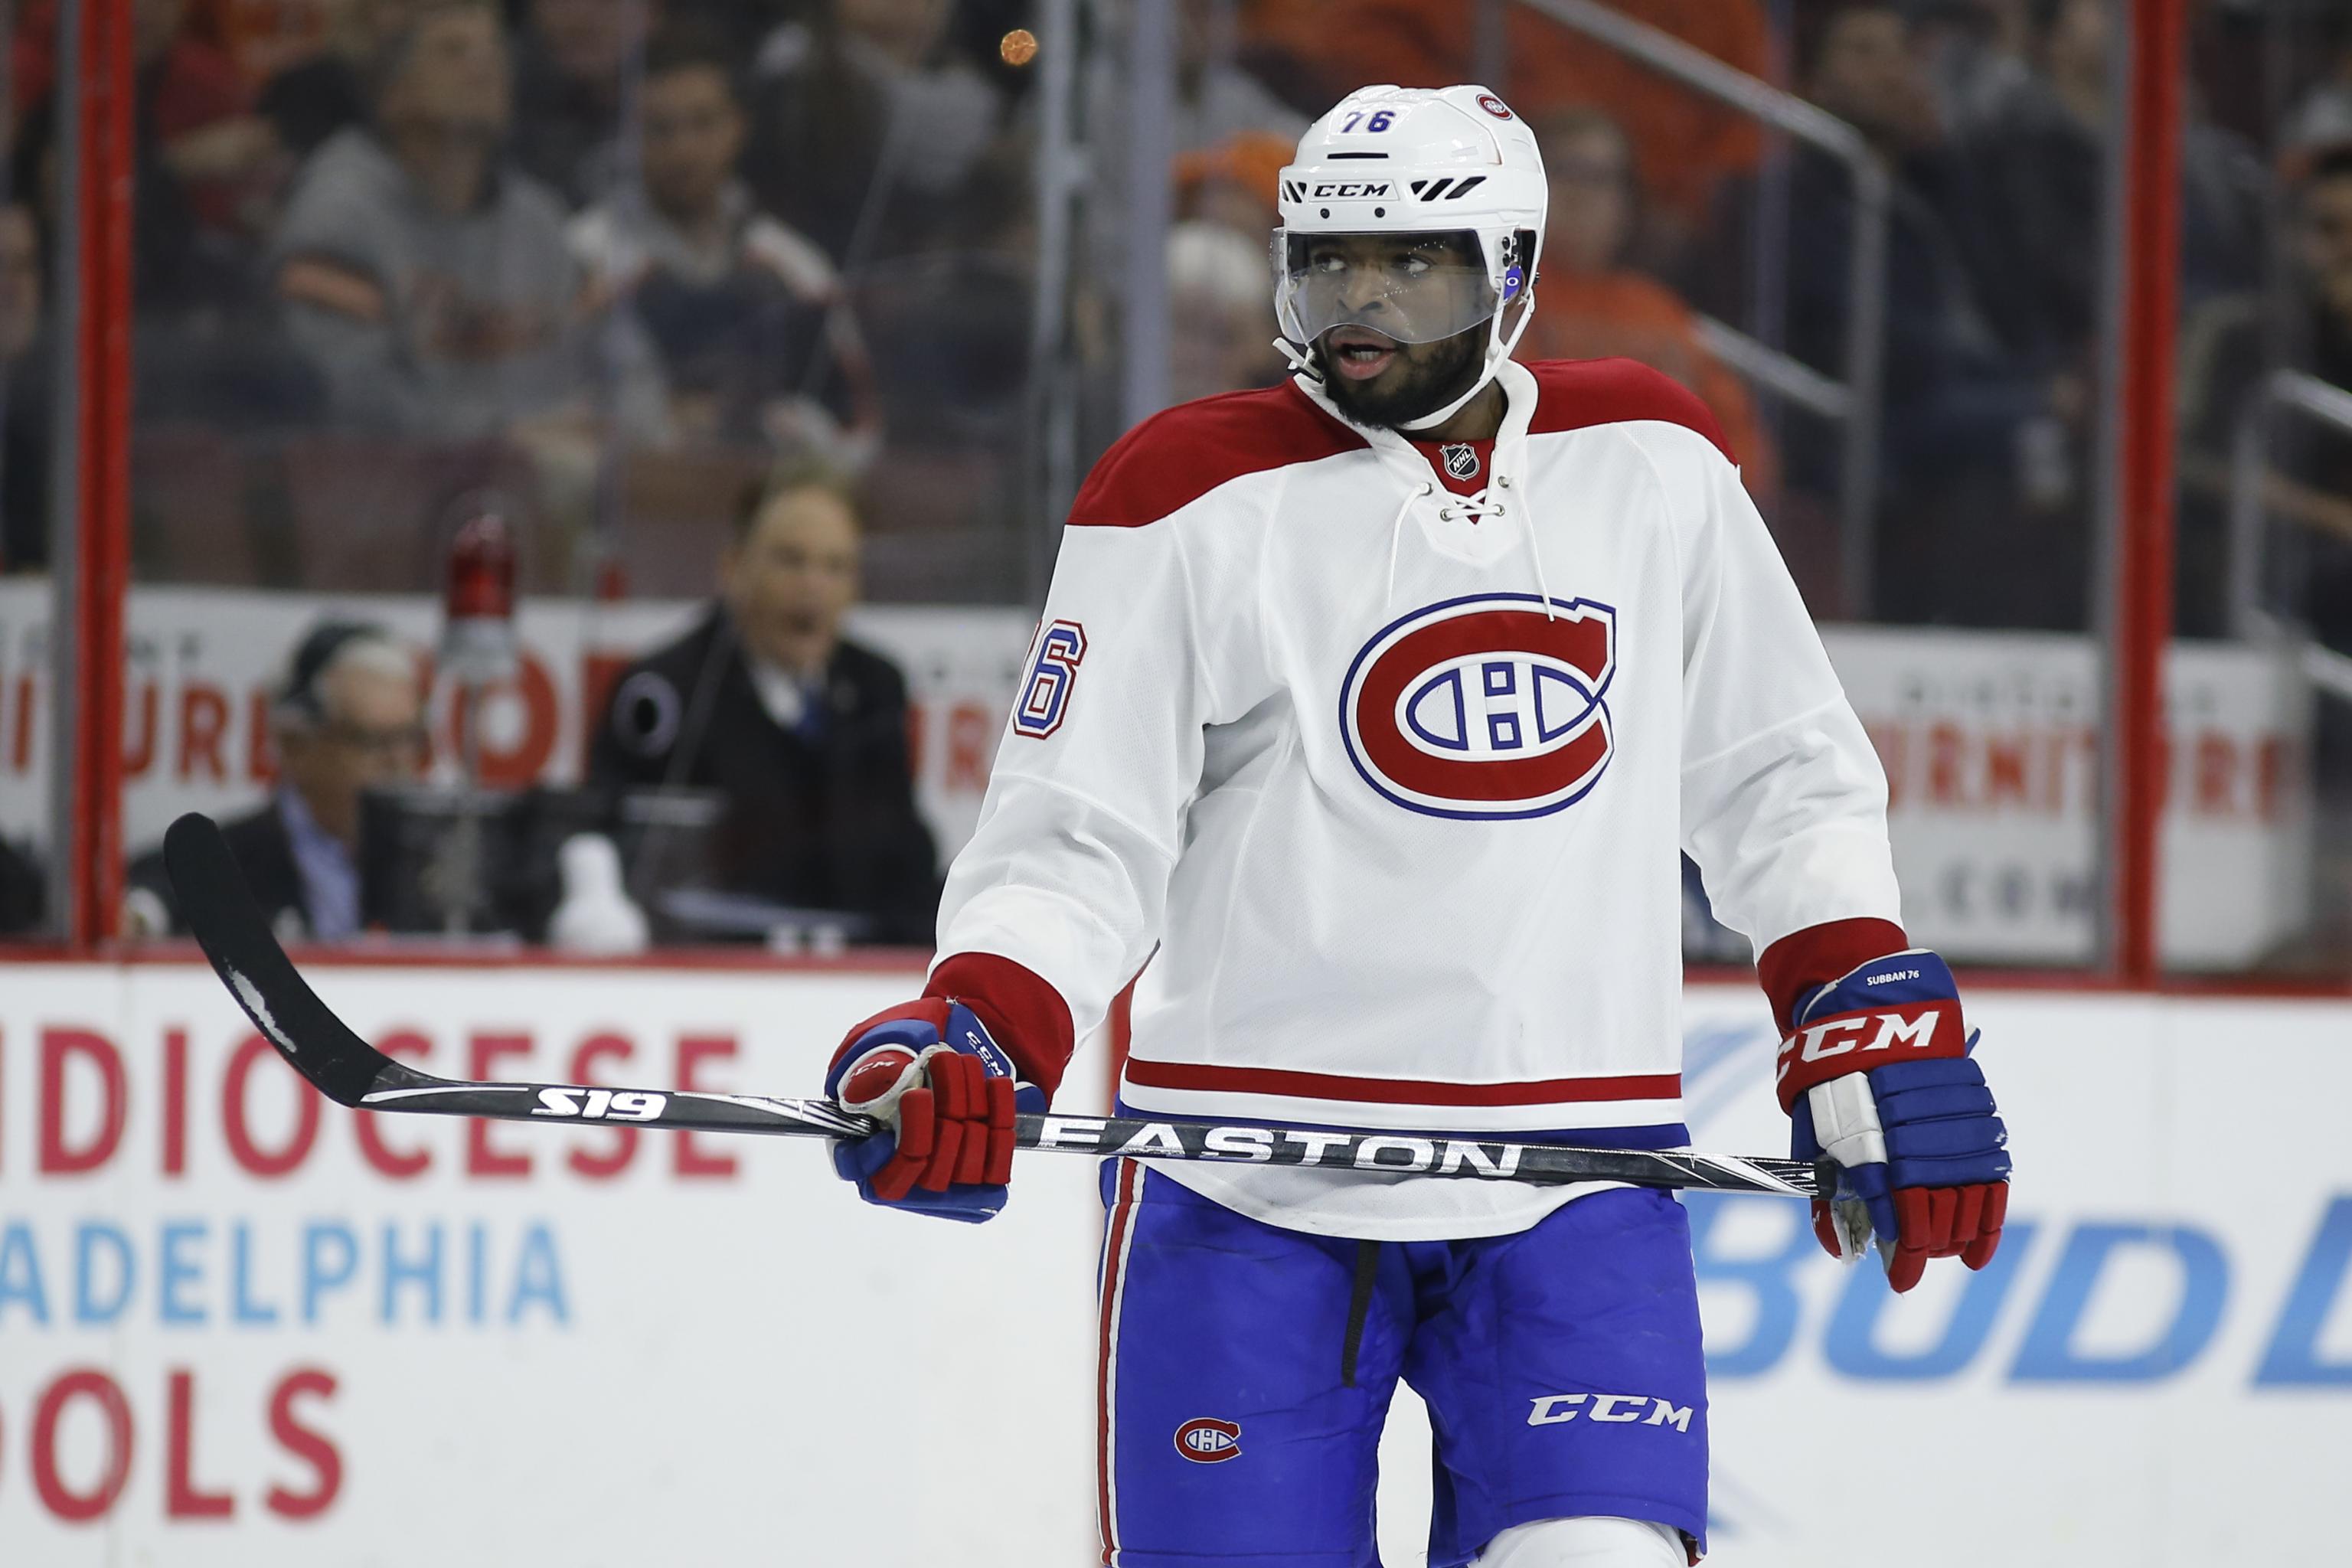 The Montreal Canadiens won't have a captain this year - will P.K. Subban  get it next year? - The Hockey News